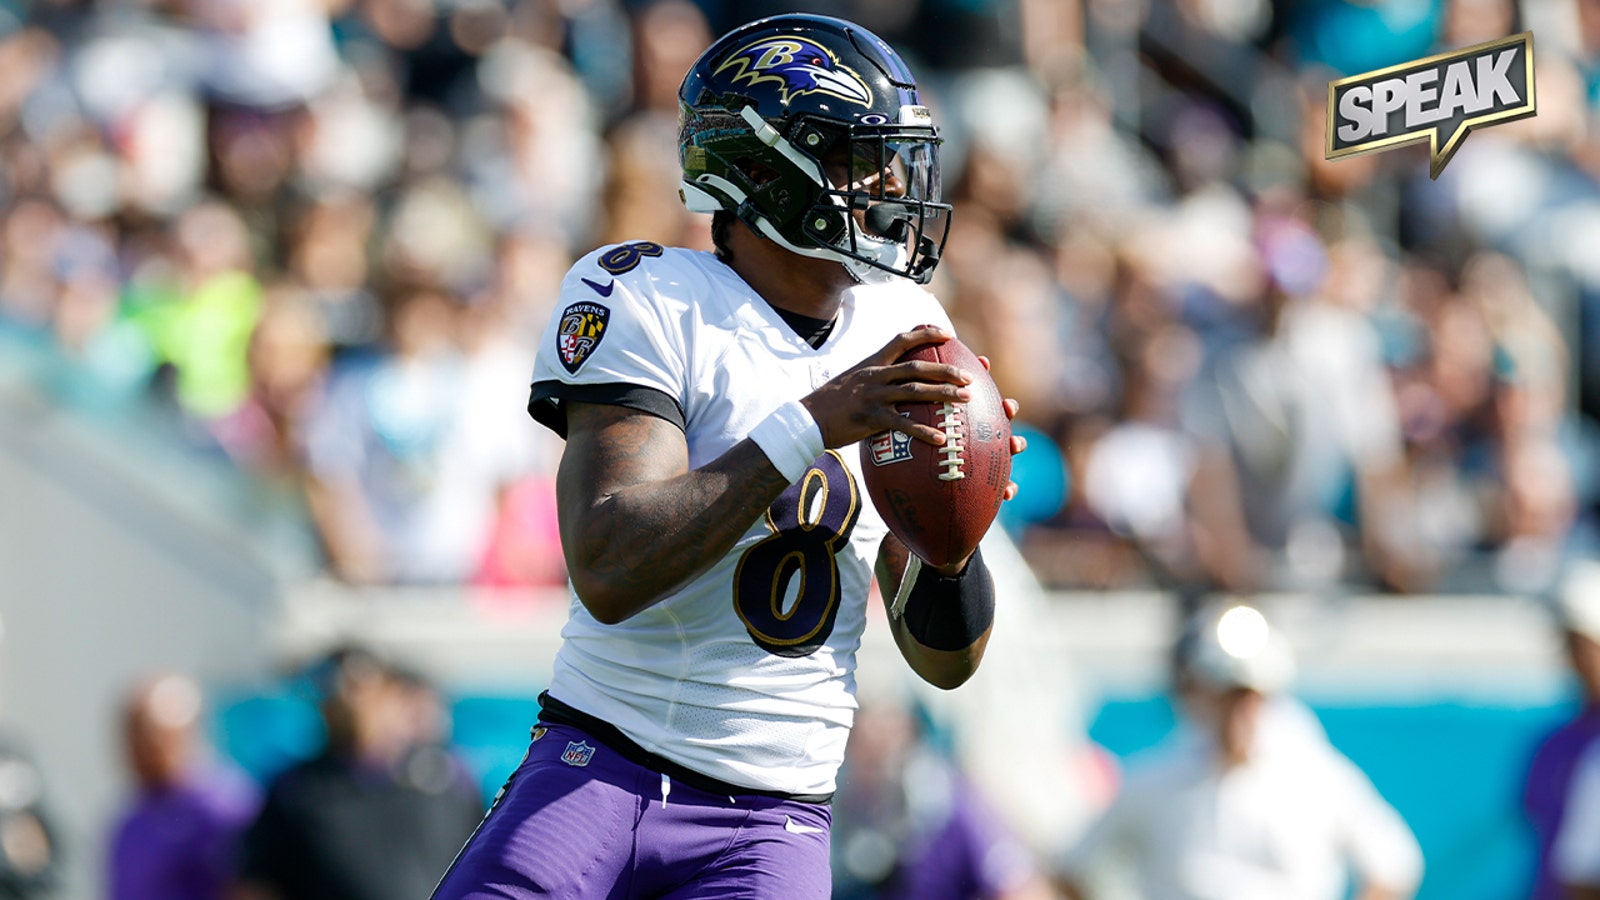 Should we worry about Lamar Jackson after his deleted tweet post Jags loss? 